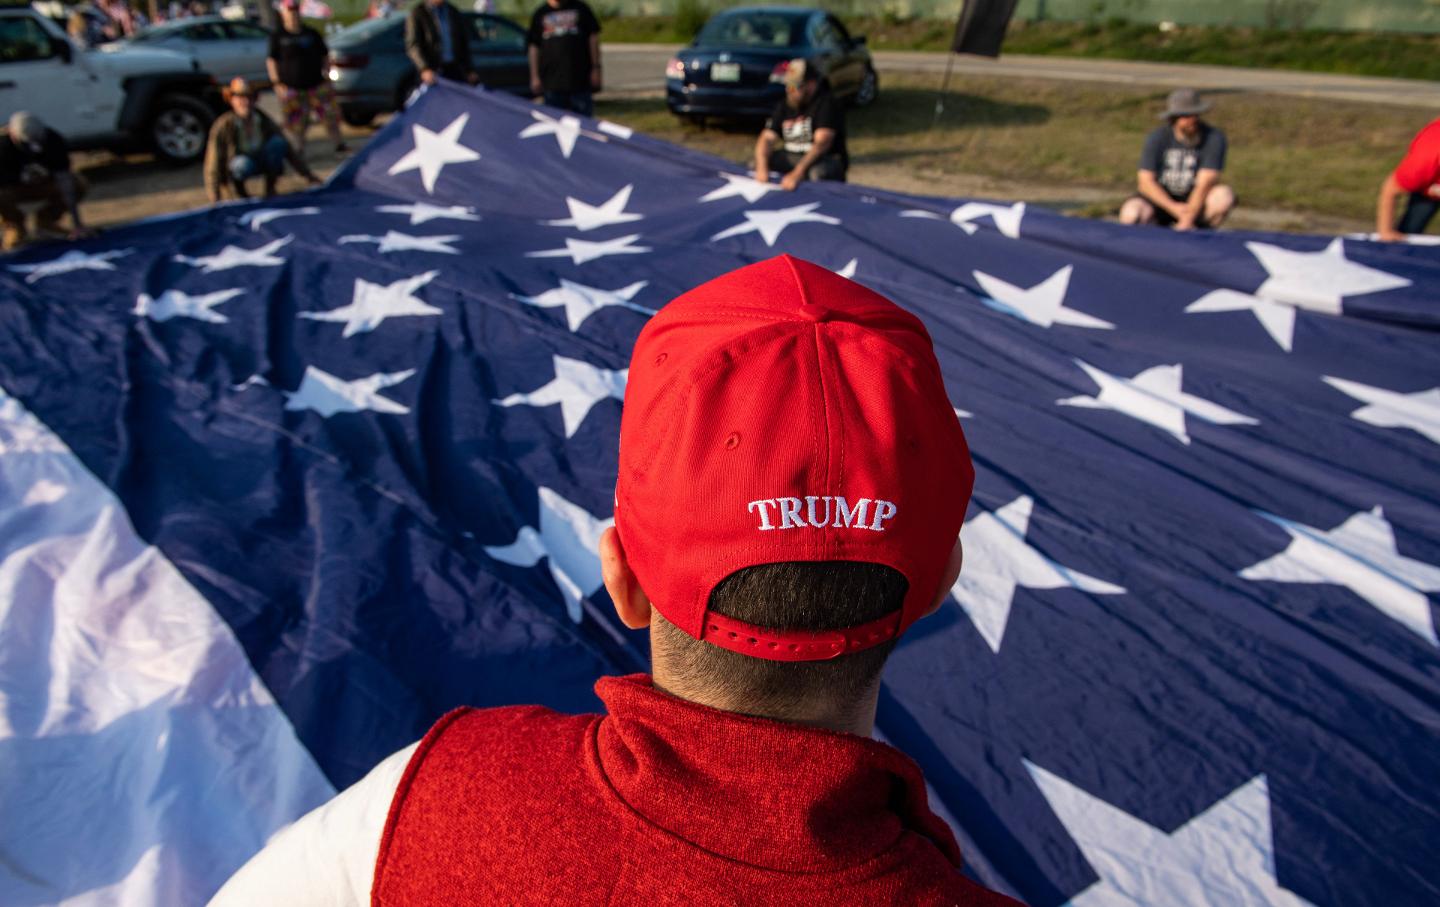 Trump supporters rally to welcome him at Manchester airport in Manchester, N.H., on May 10, ahead of his CNN town hall.